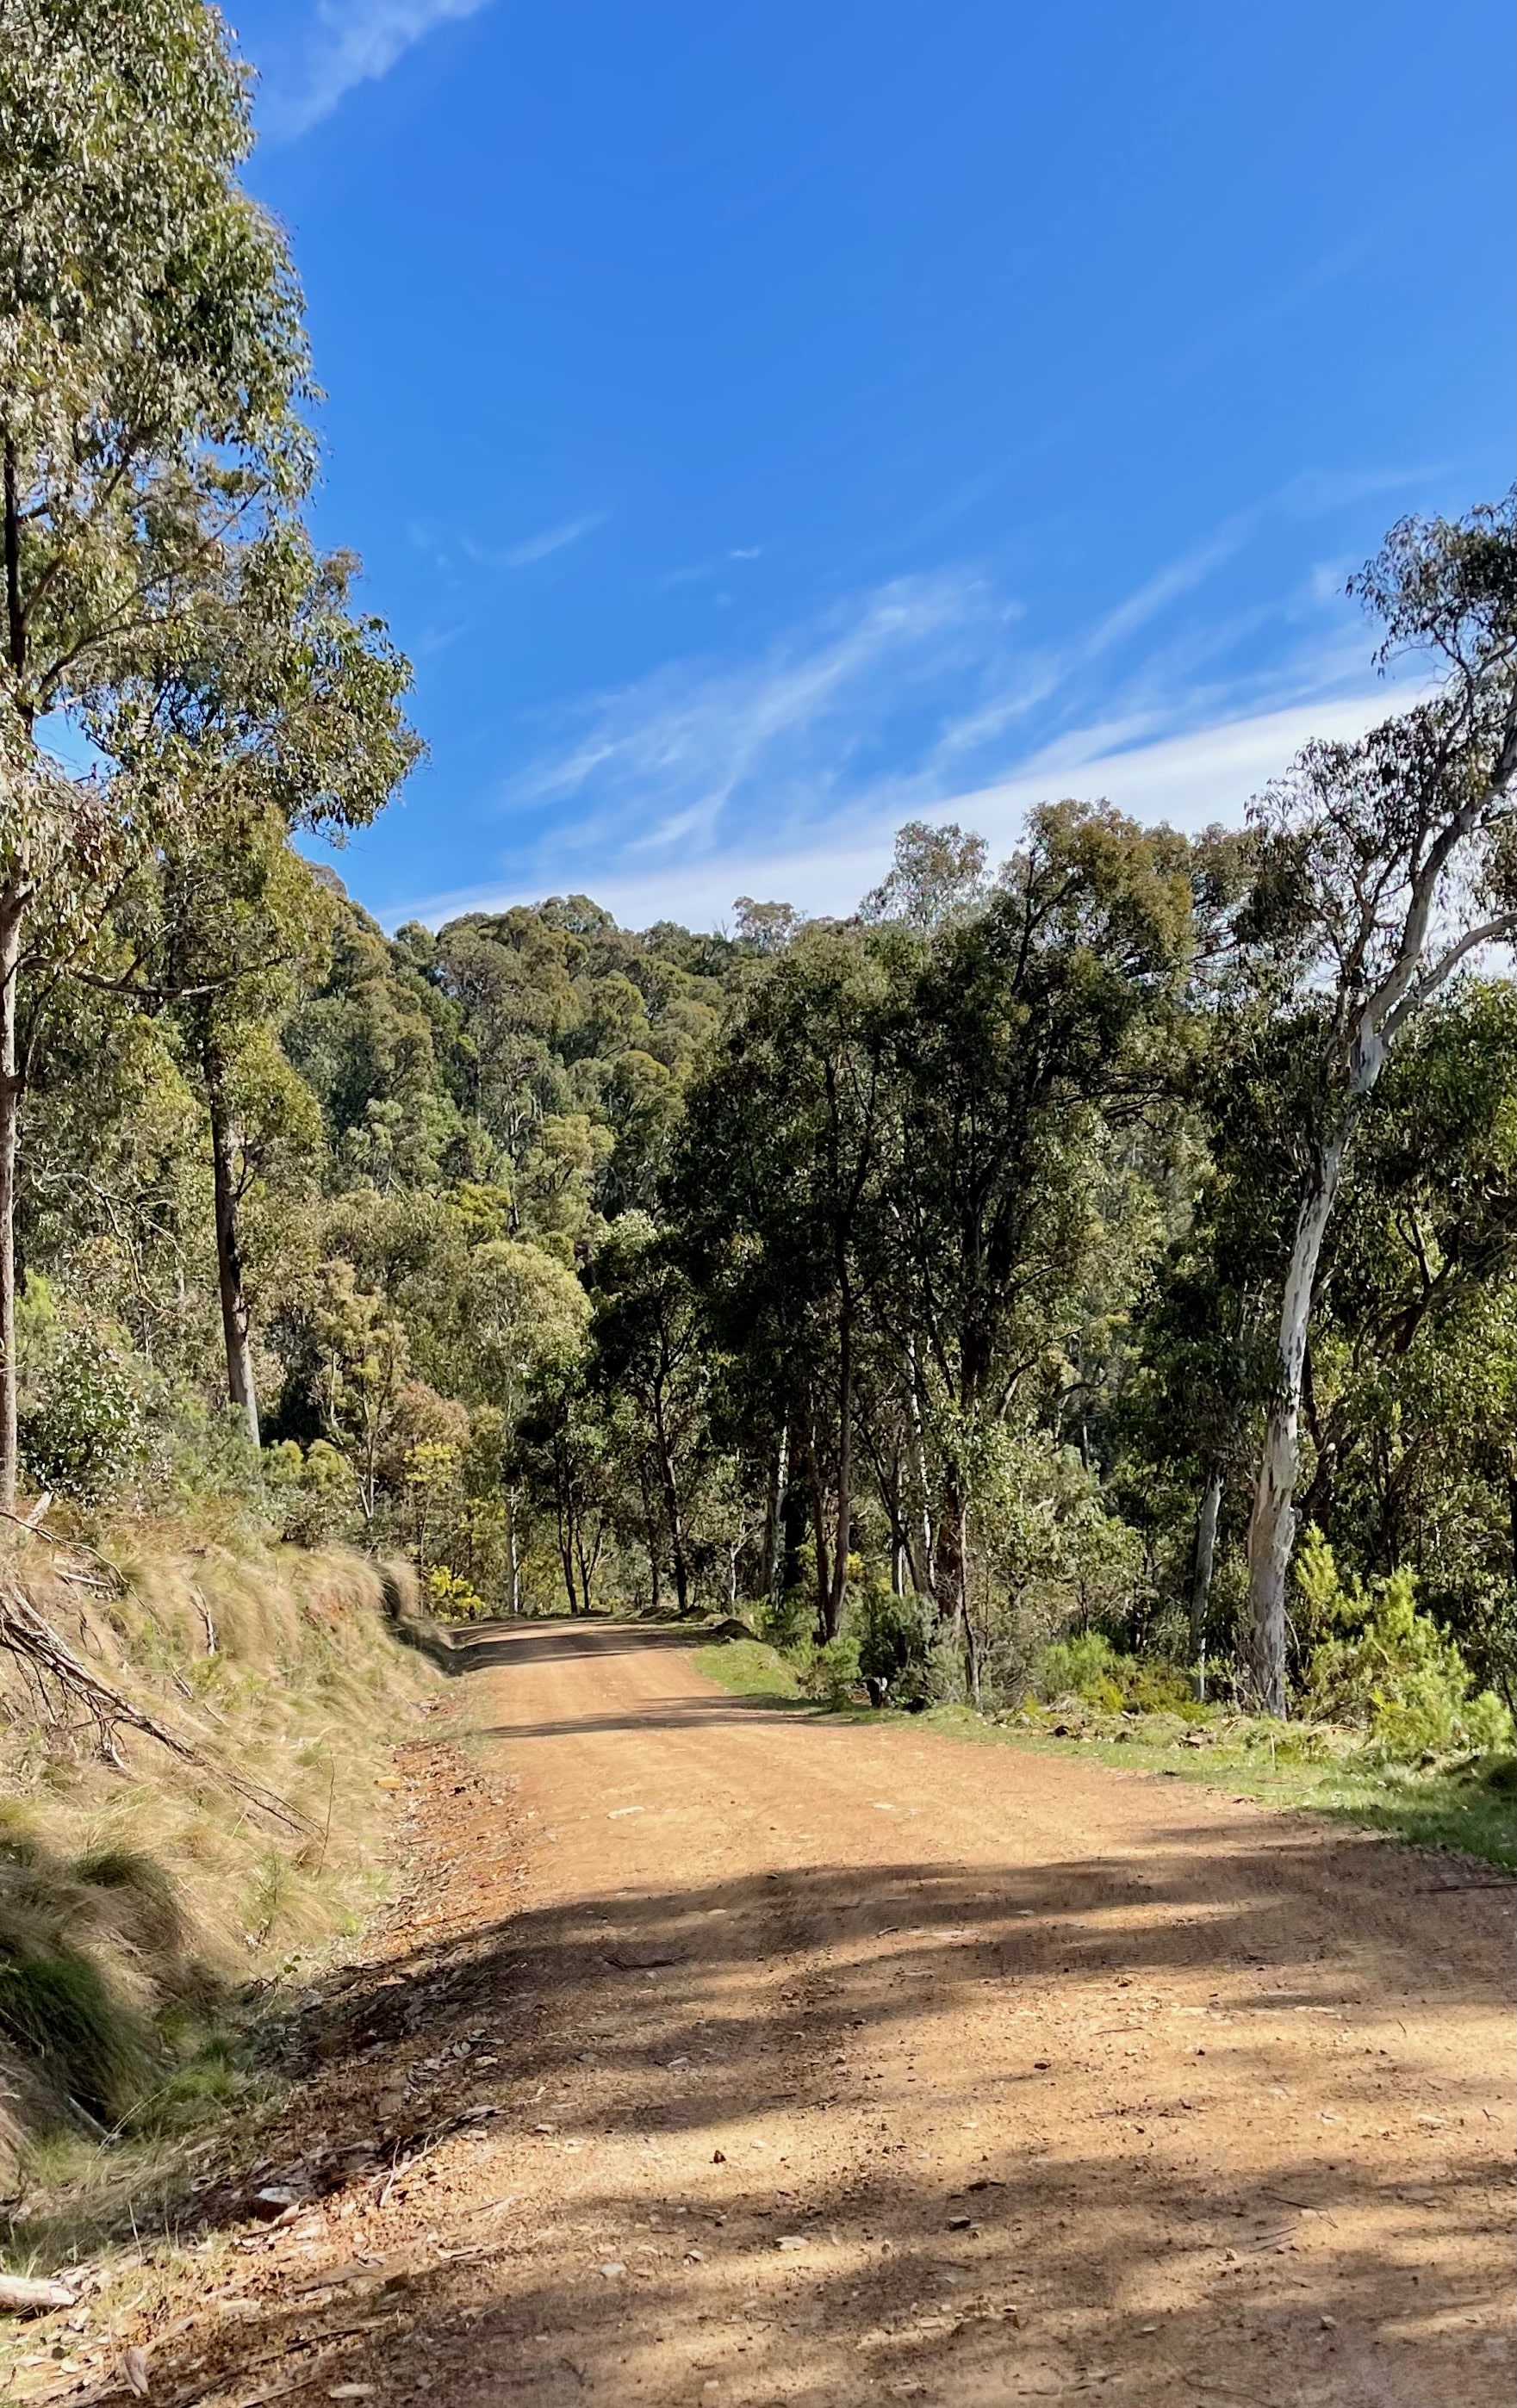 Gravel road winding through native bushland on a sunny day